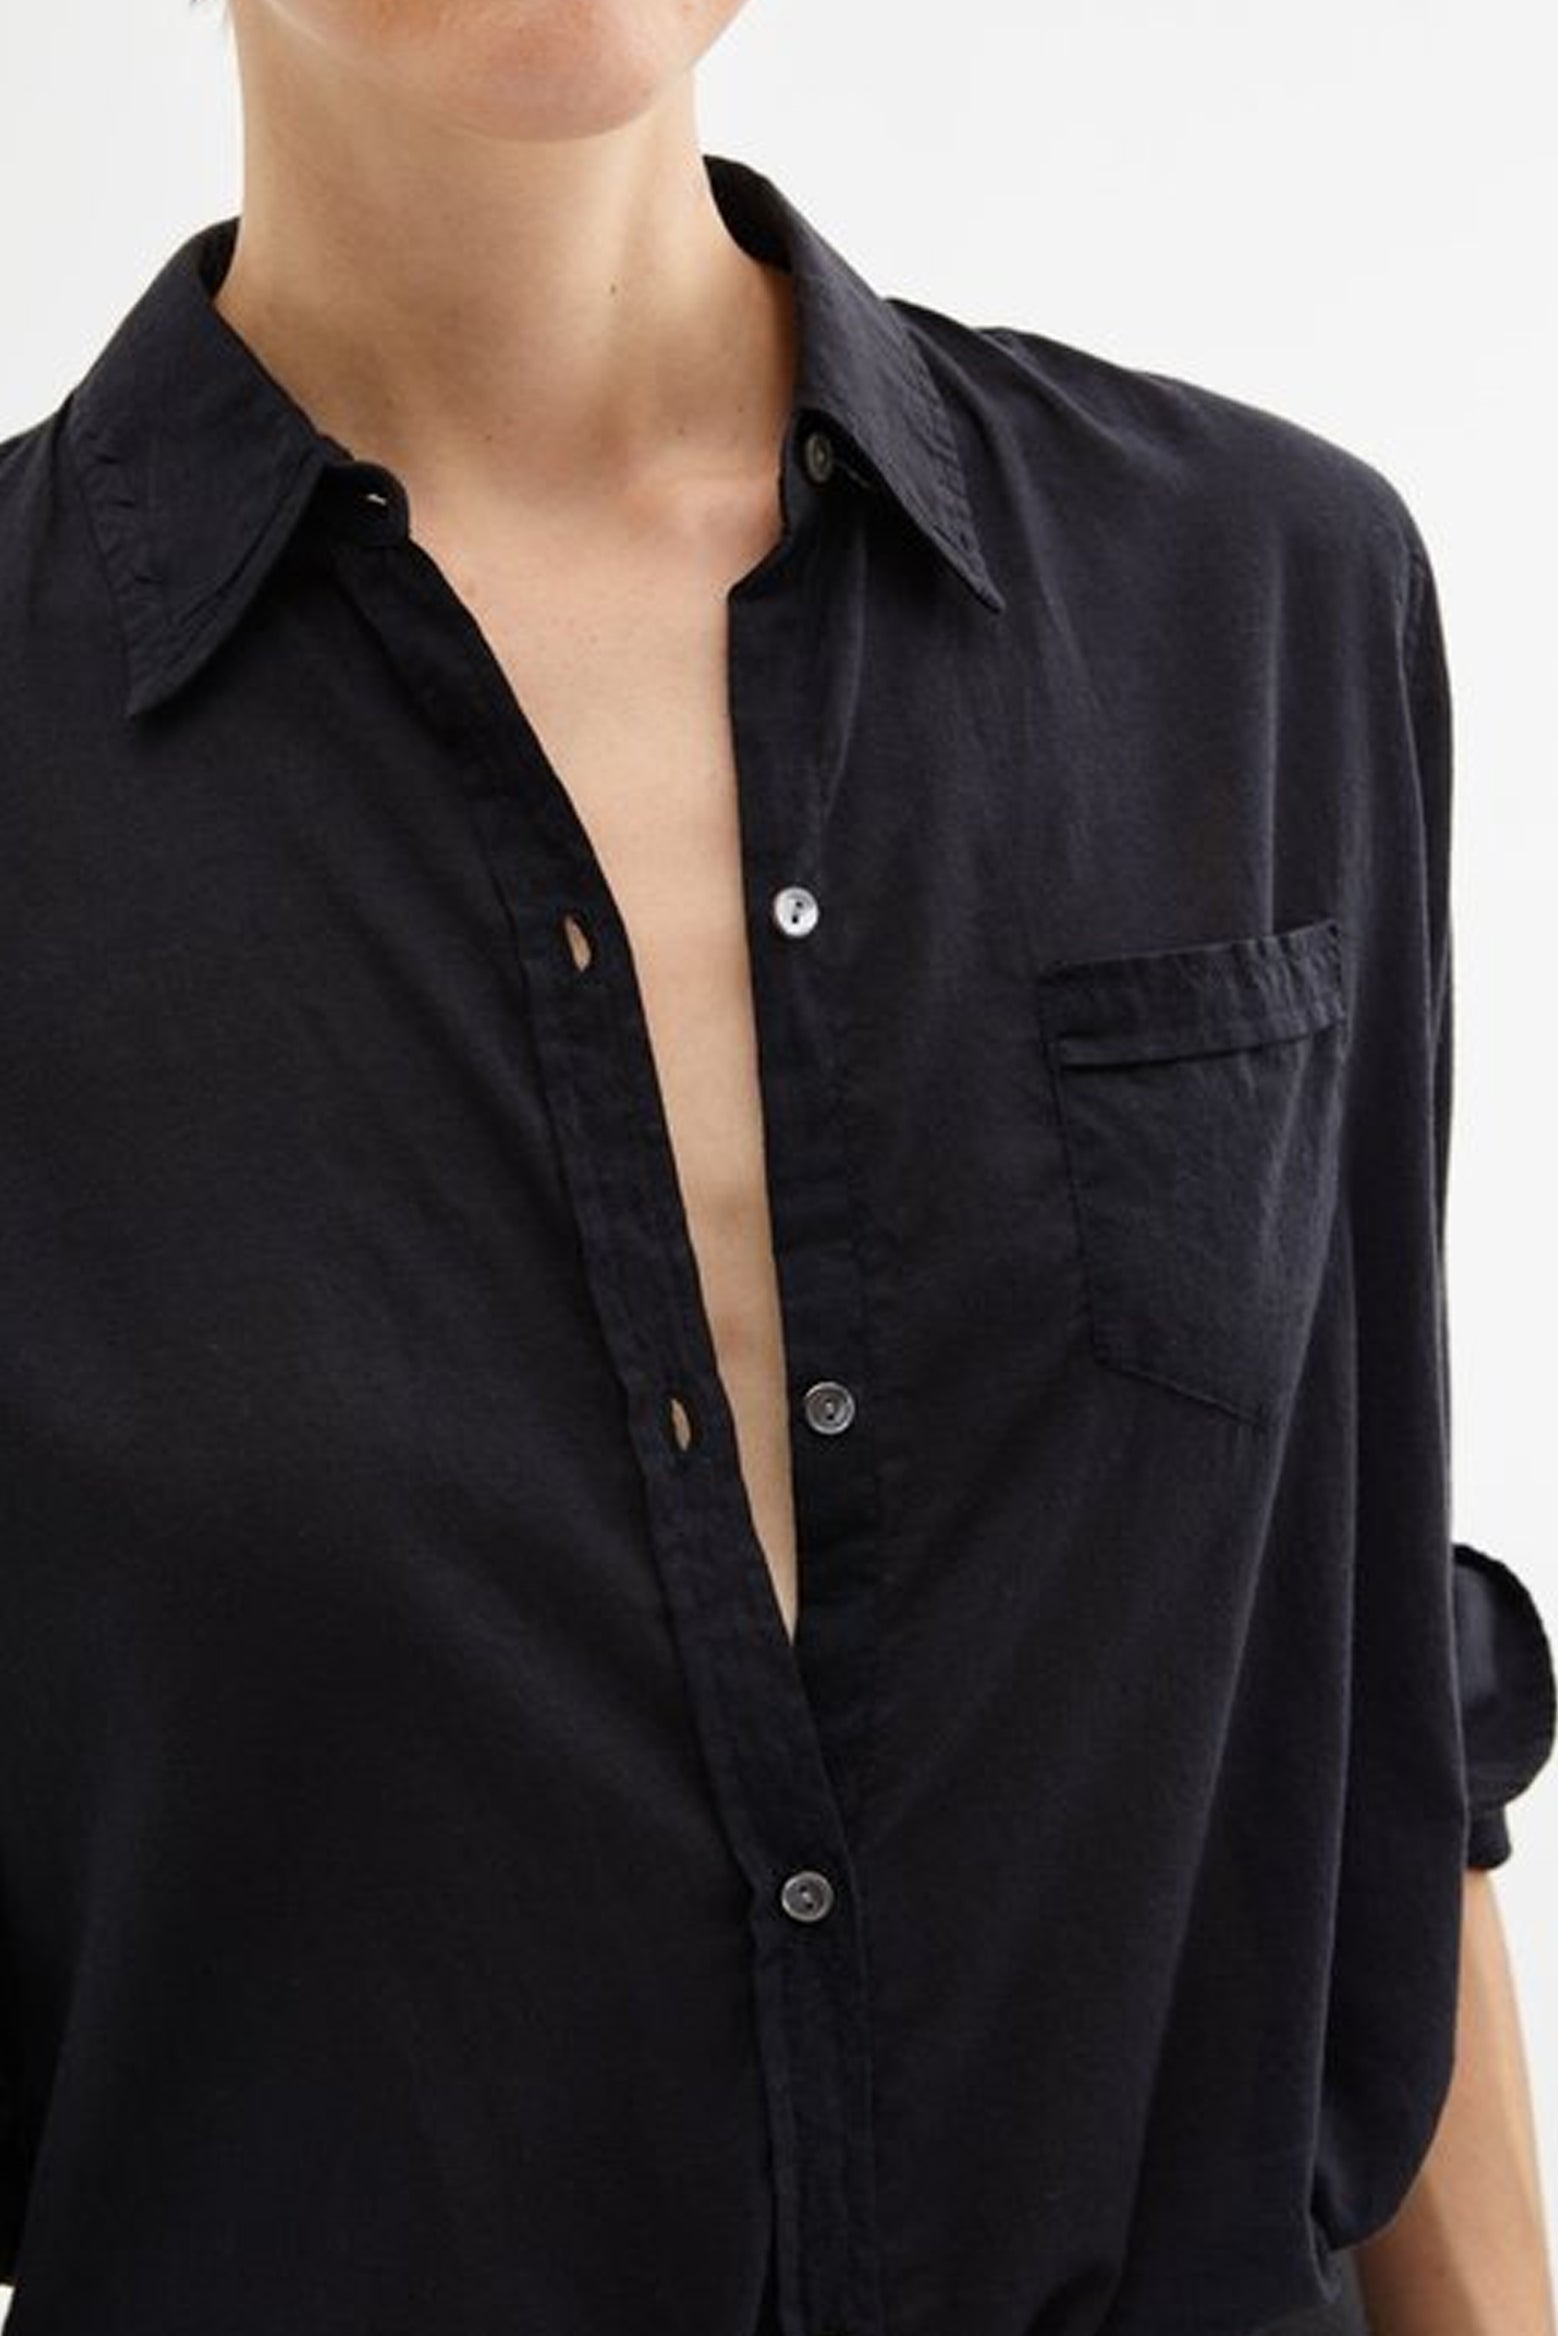 Nili Lotan Cotton Voile NL Shirt in Black available at The New Trend Australia.